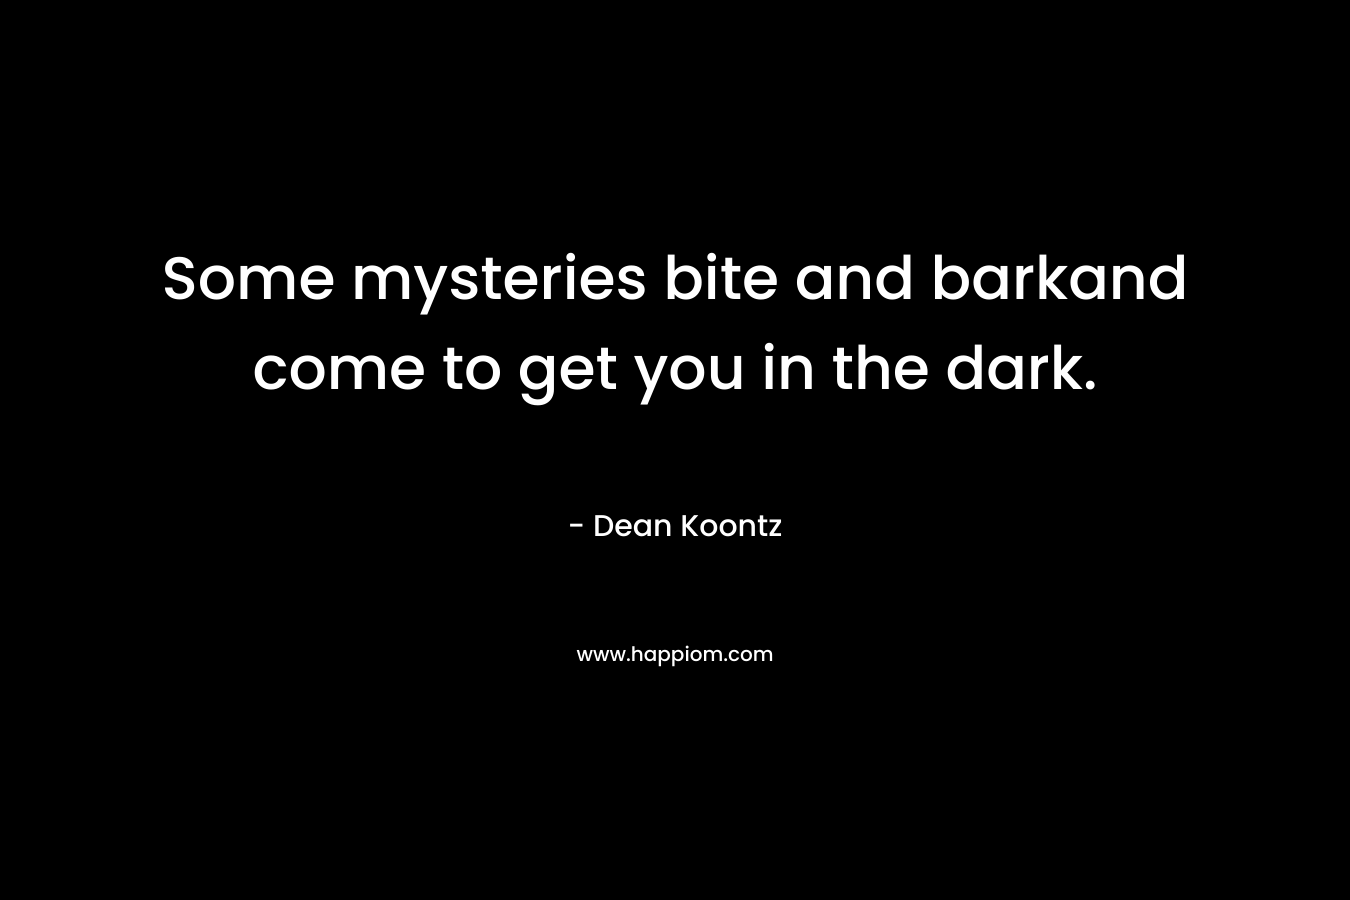 Some mysteries bite and barkand come to get you in the dark.